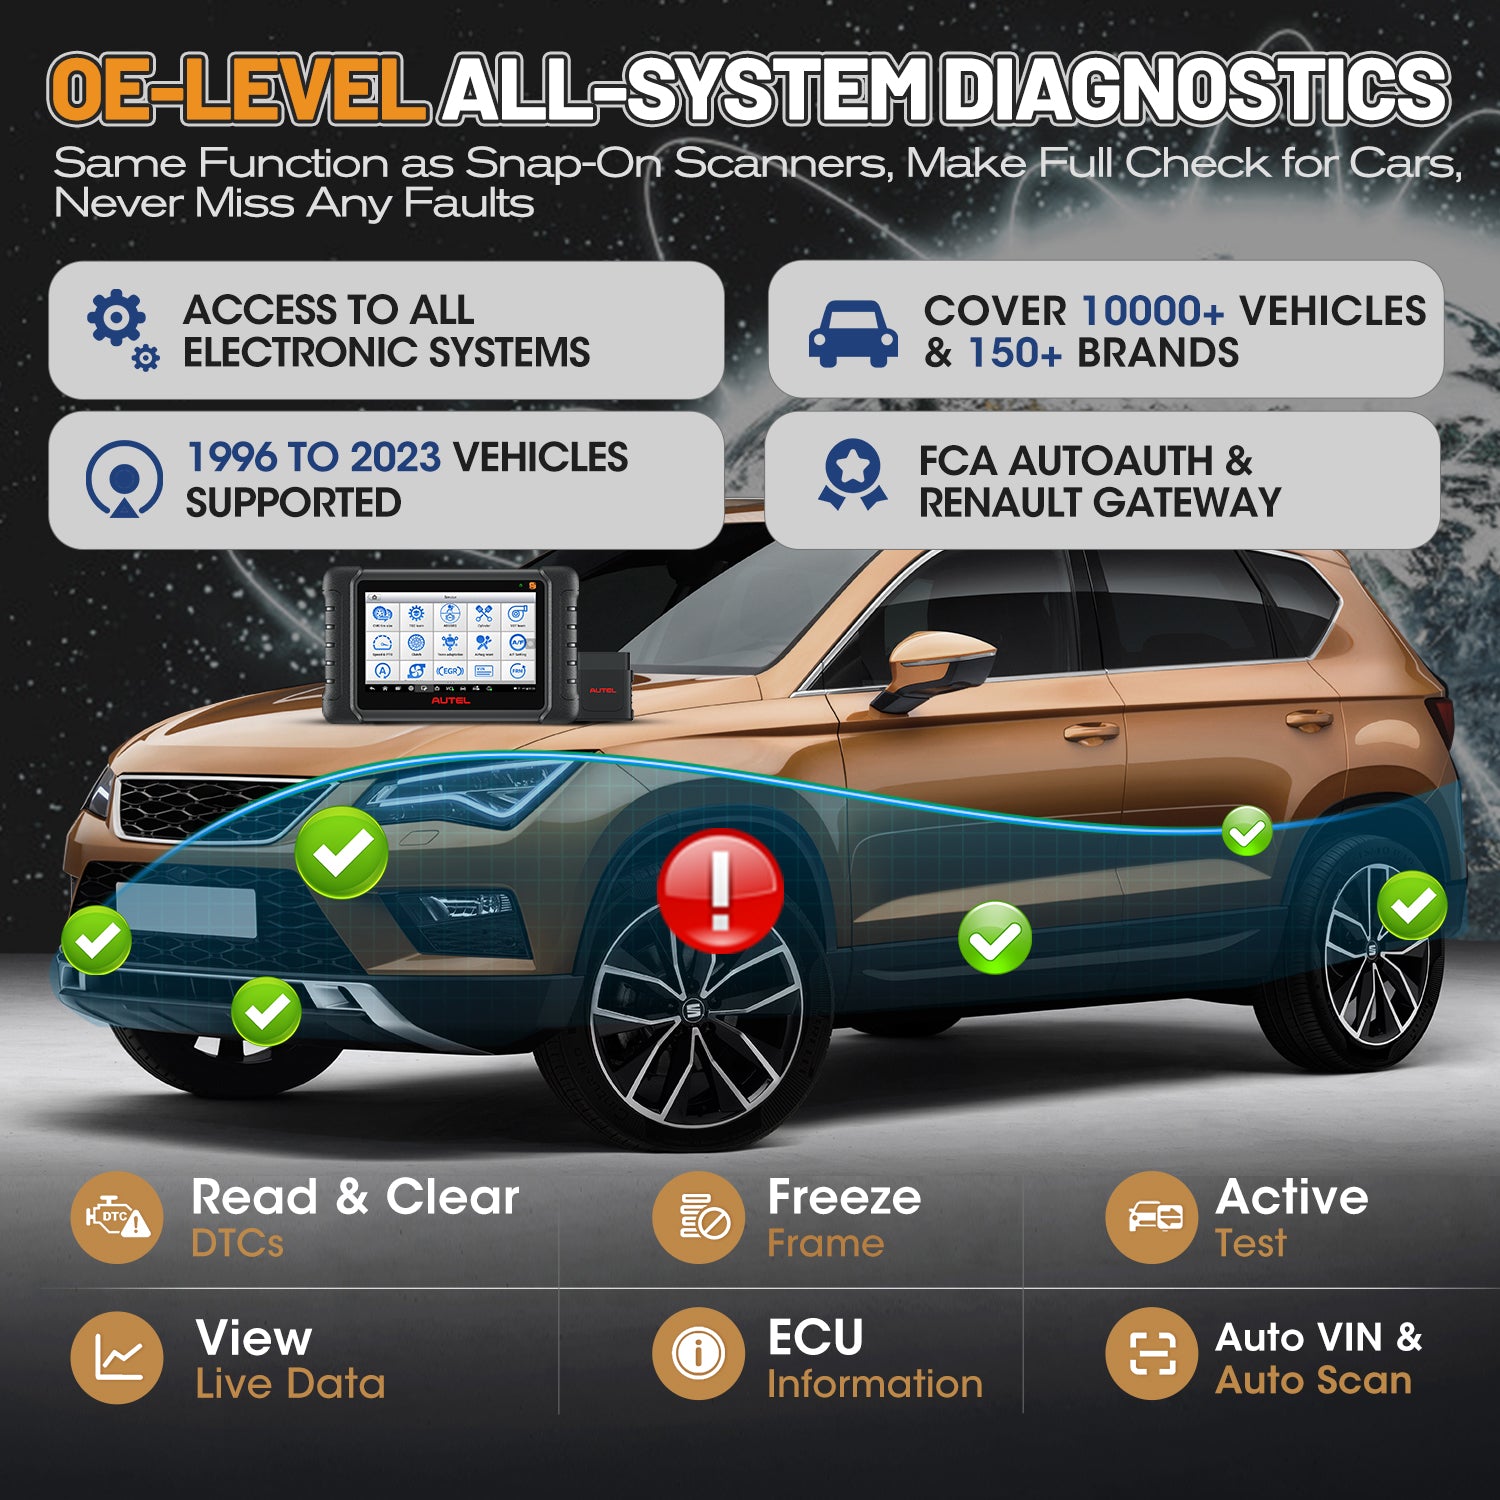 MX808S-TS with ALL-System Coverage & Full OBE-Level Diagnostic